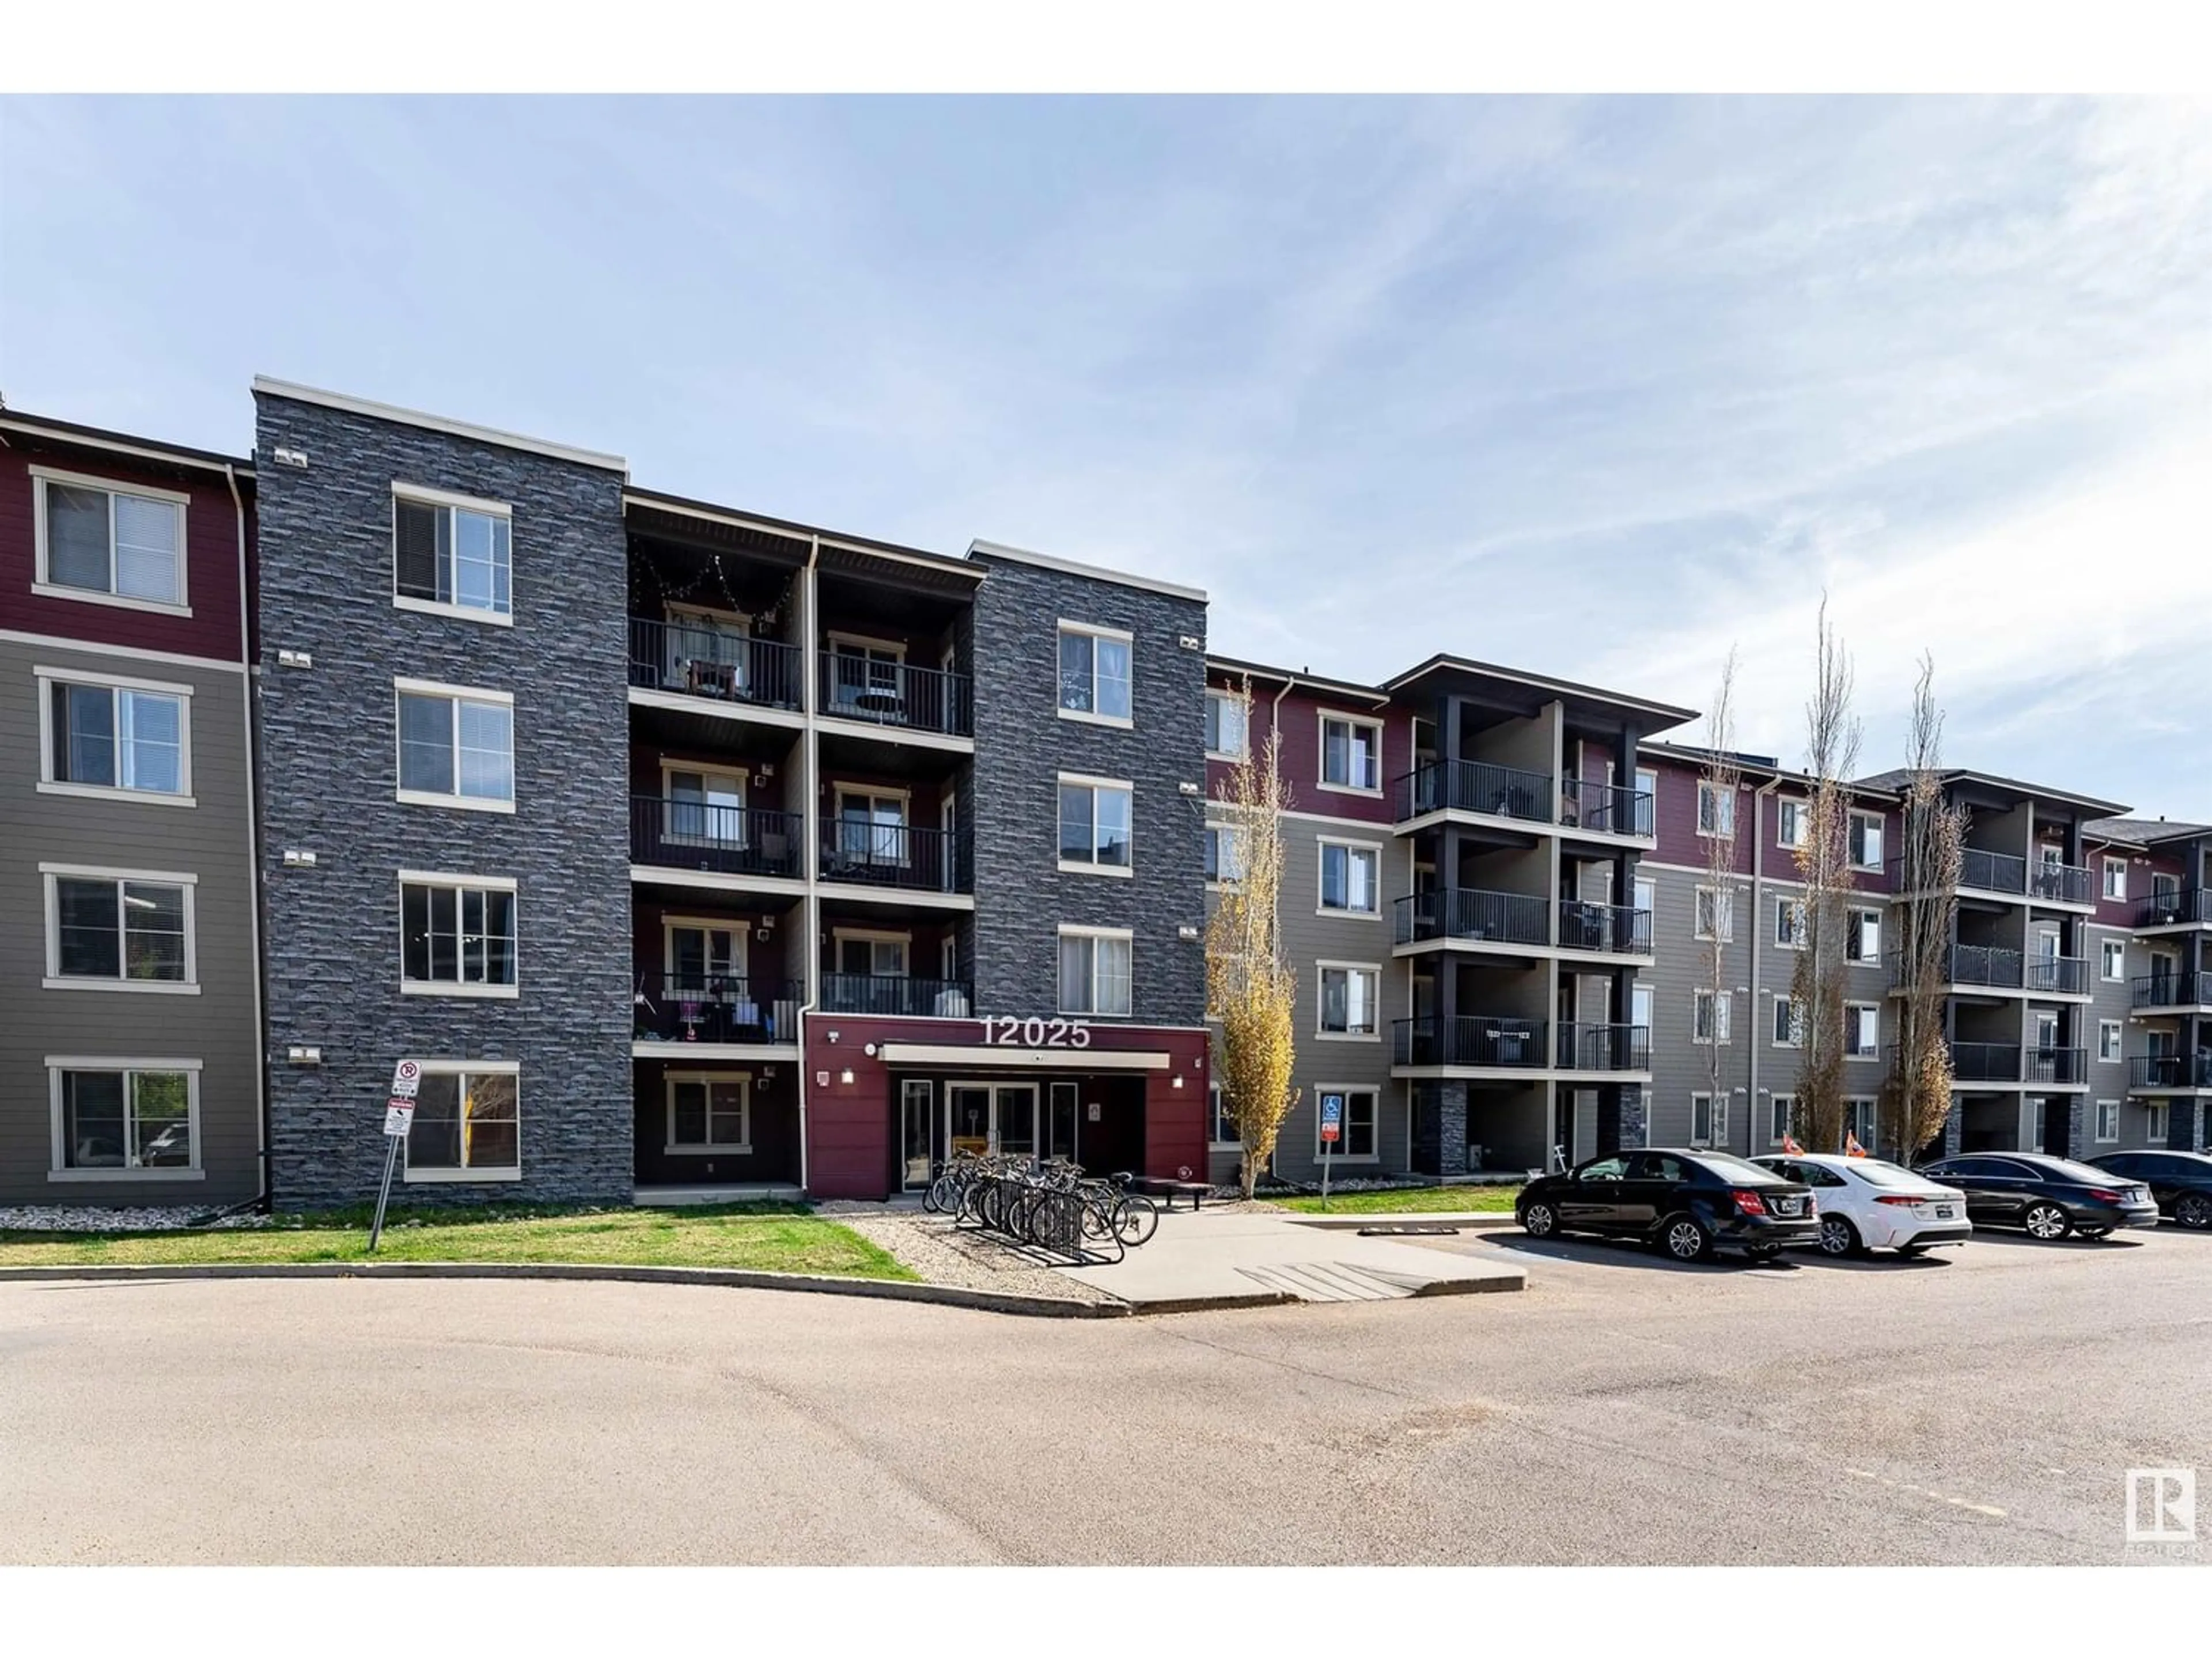 A pic from exterior of the house or condo for #206 12025 22 AV SW, Edmonton Alberta T6W2Y1